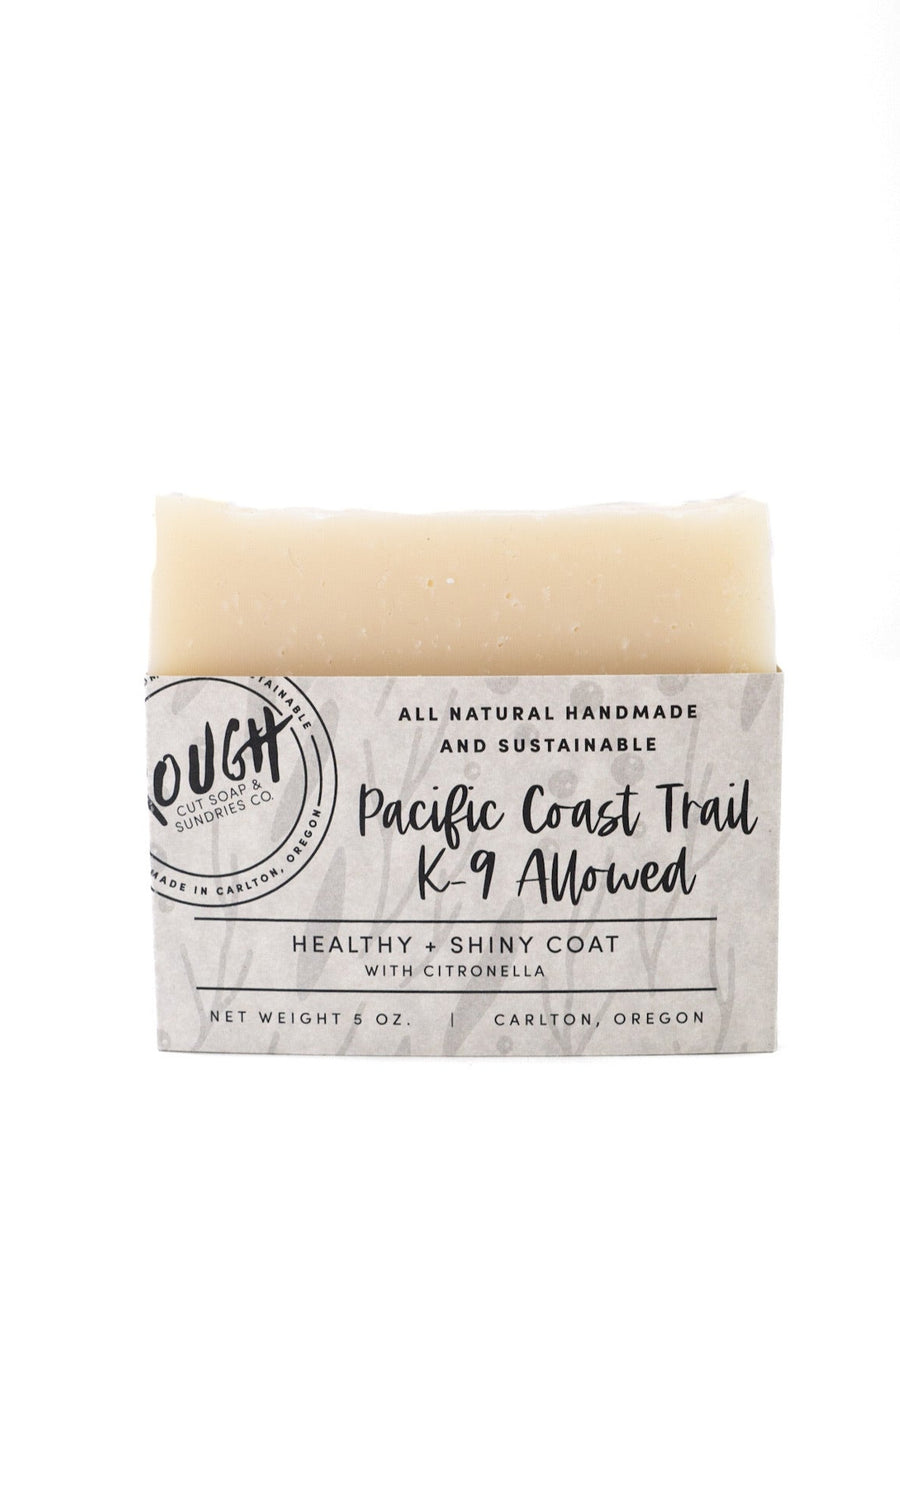 Pacific Coast Trail K9 Soap by Rough Cut Soap & Sundries